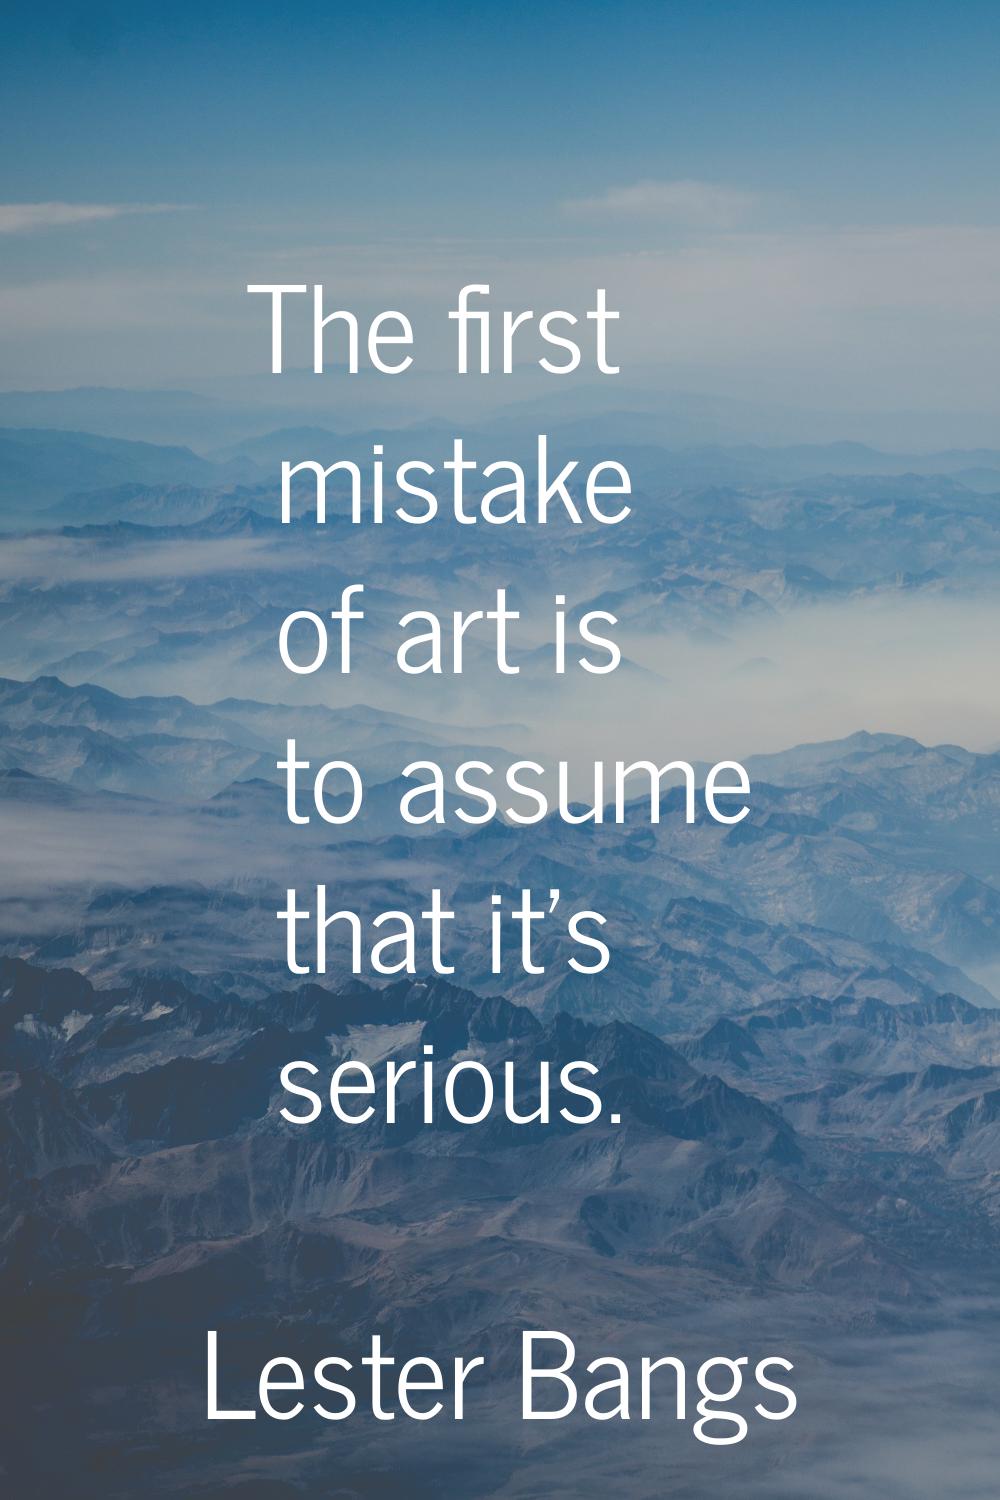 The first mistake of art is to assume that it's serious.